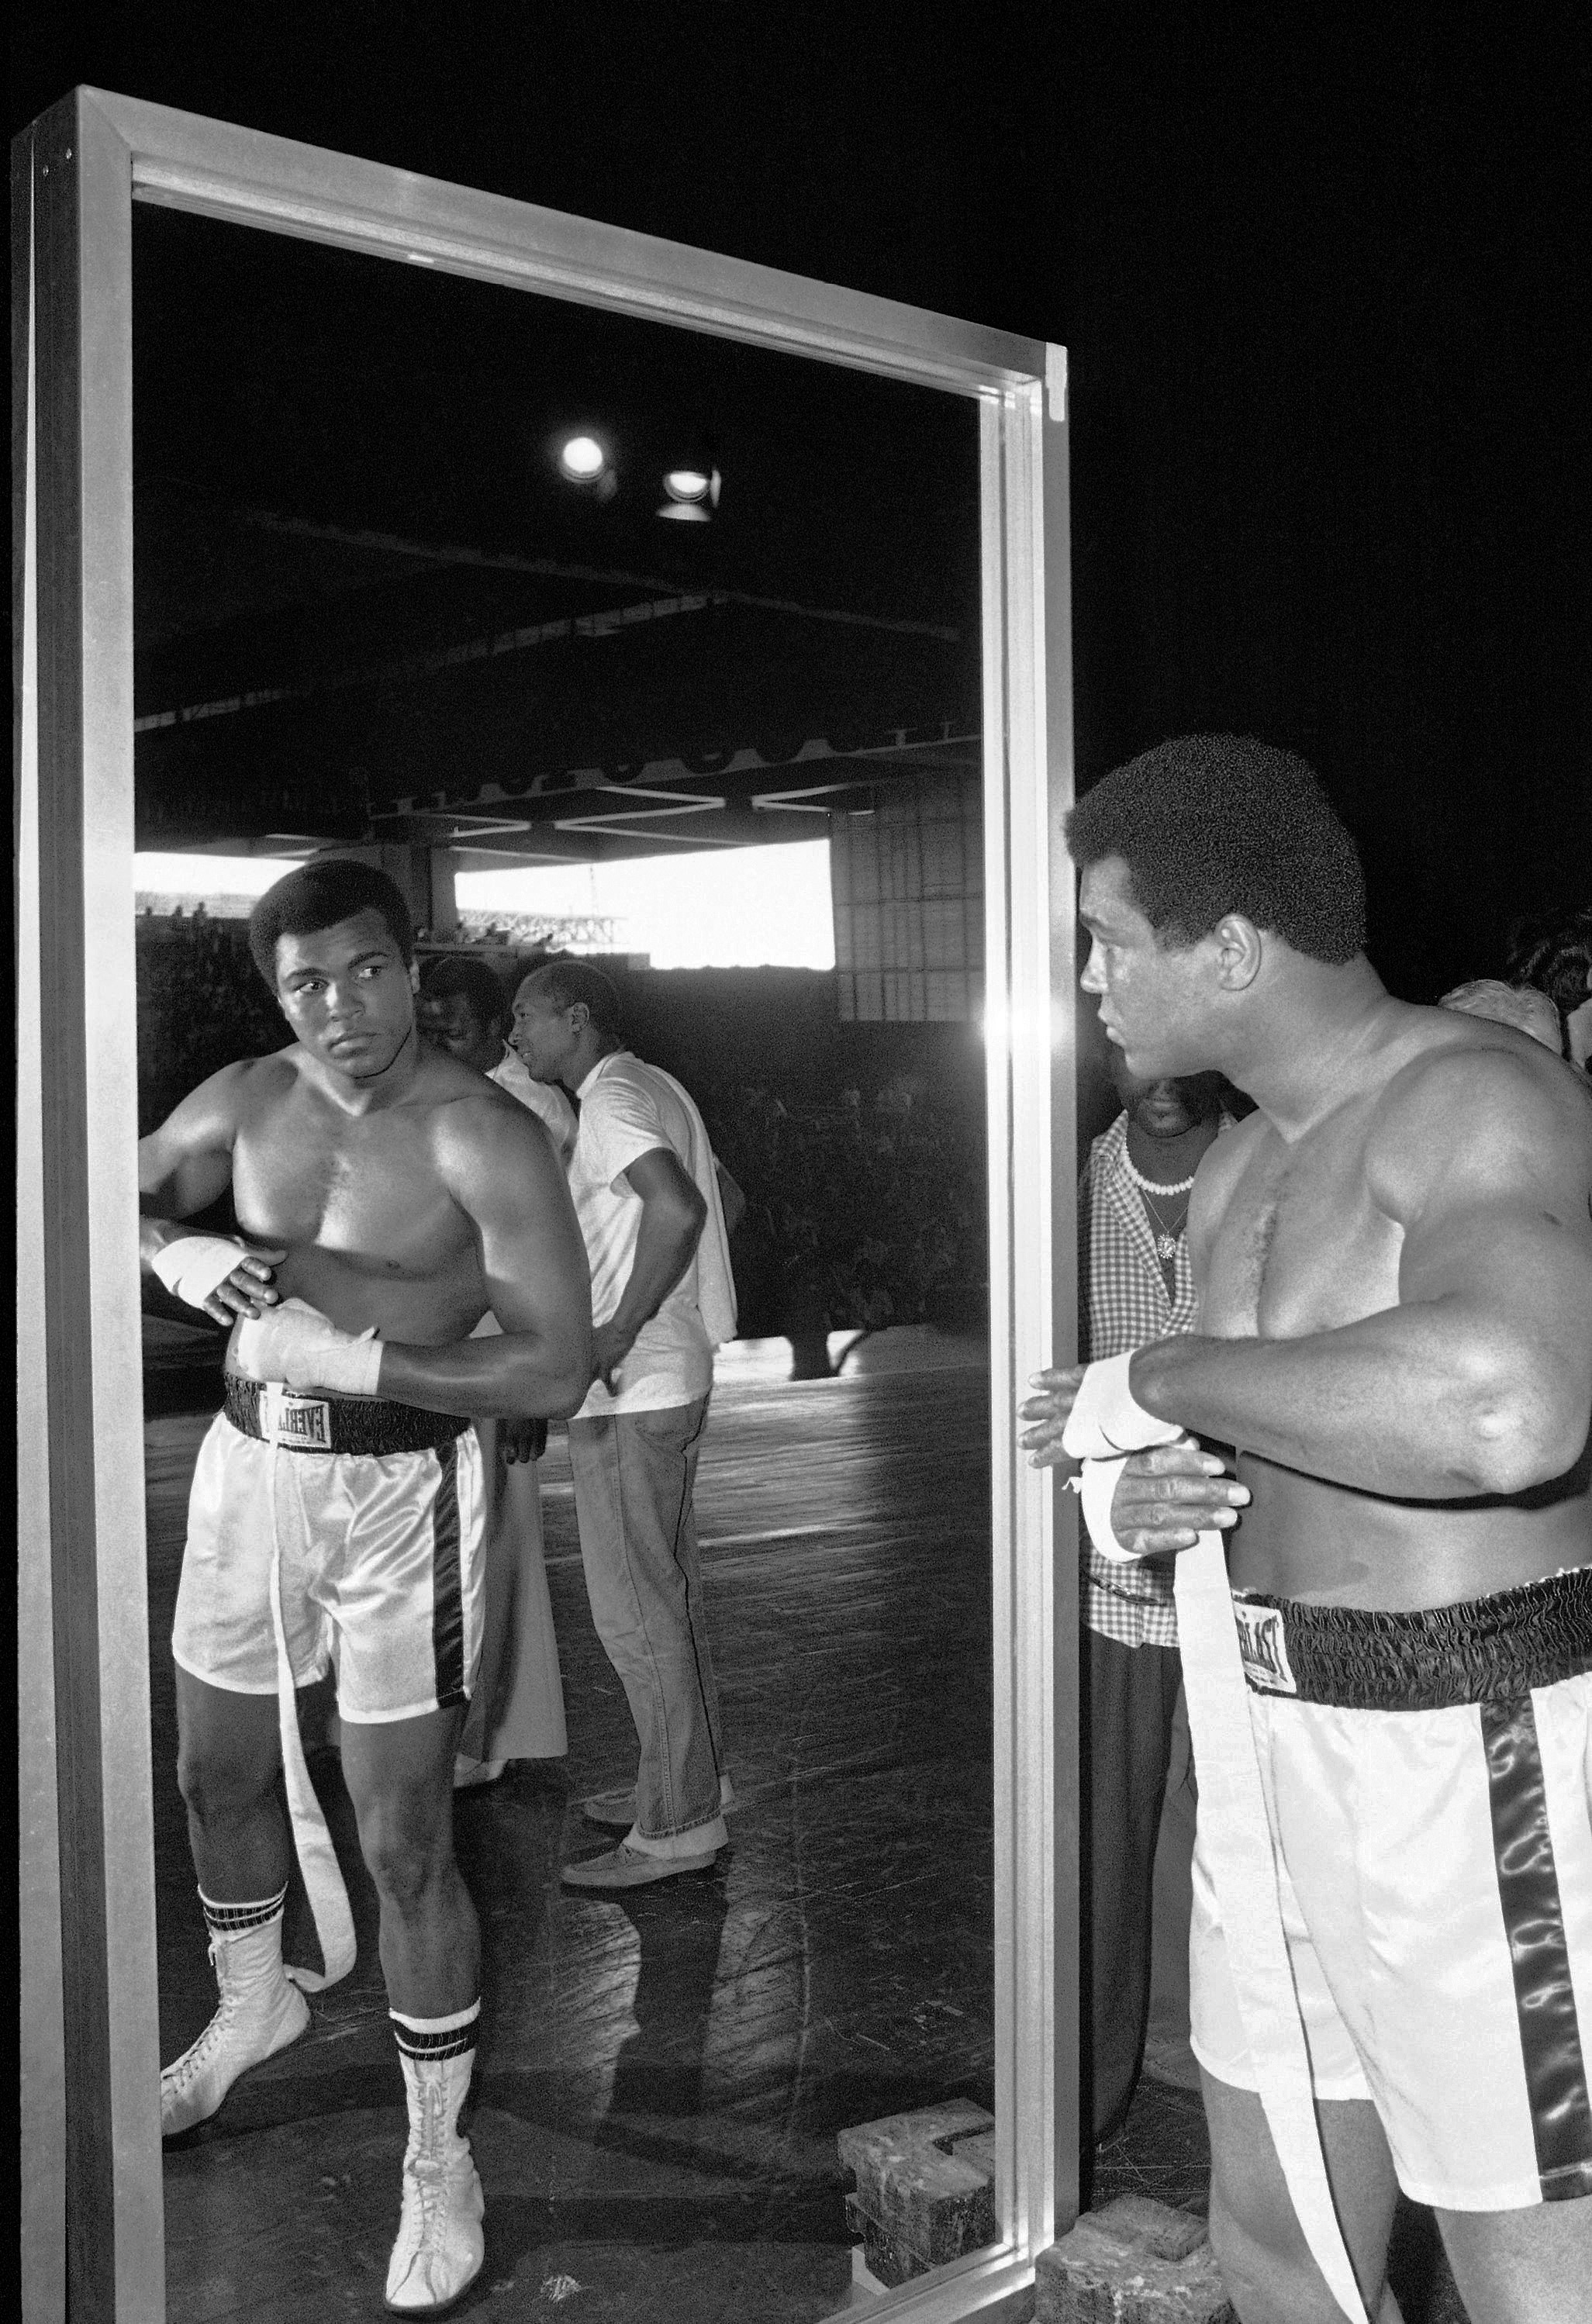  Checking himself out in a mirror during a training session in Manila, Philippines